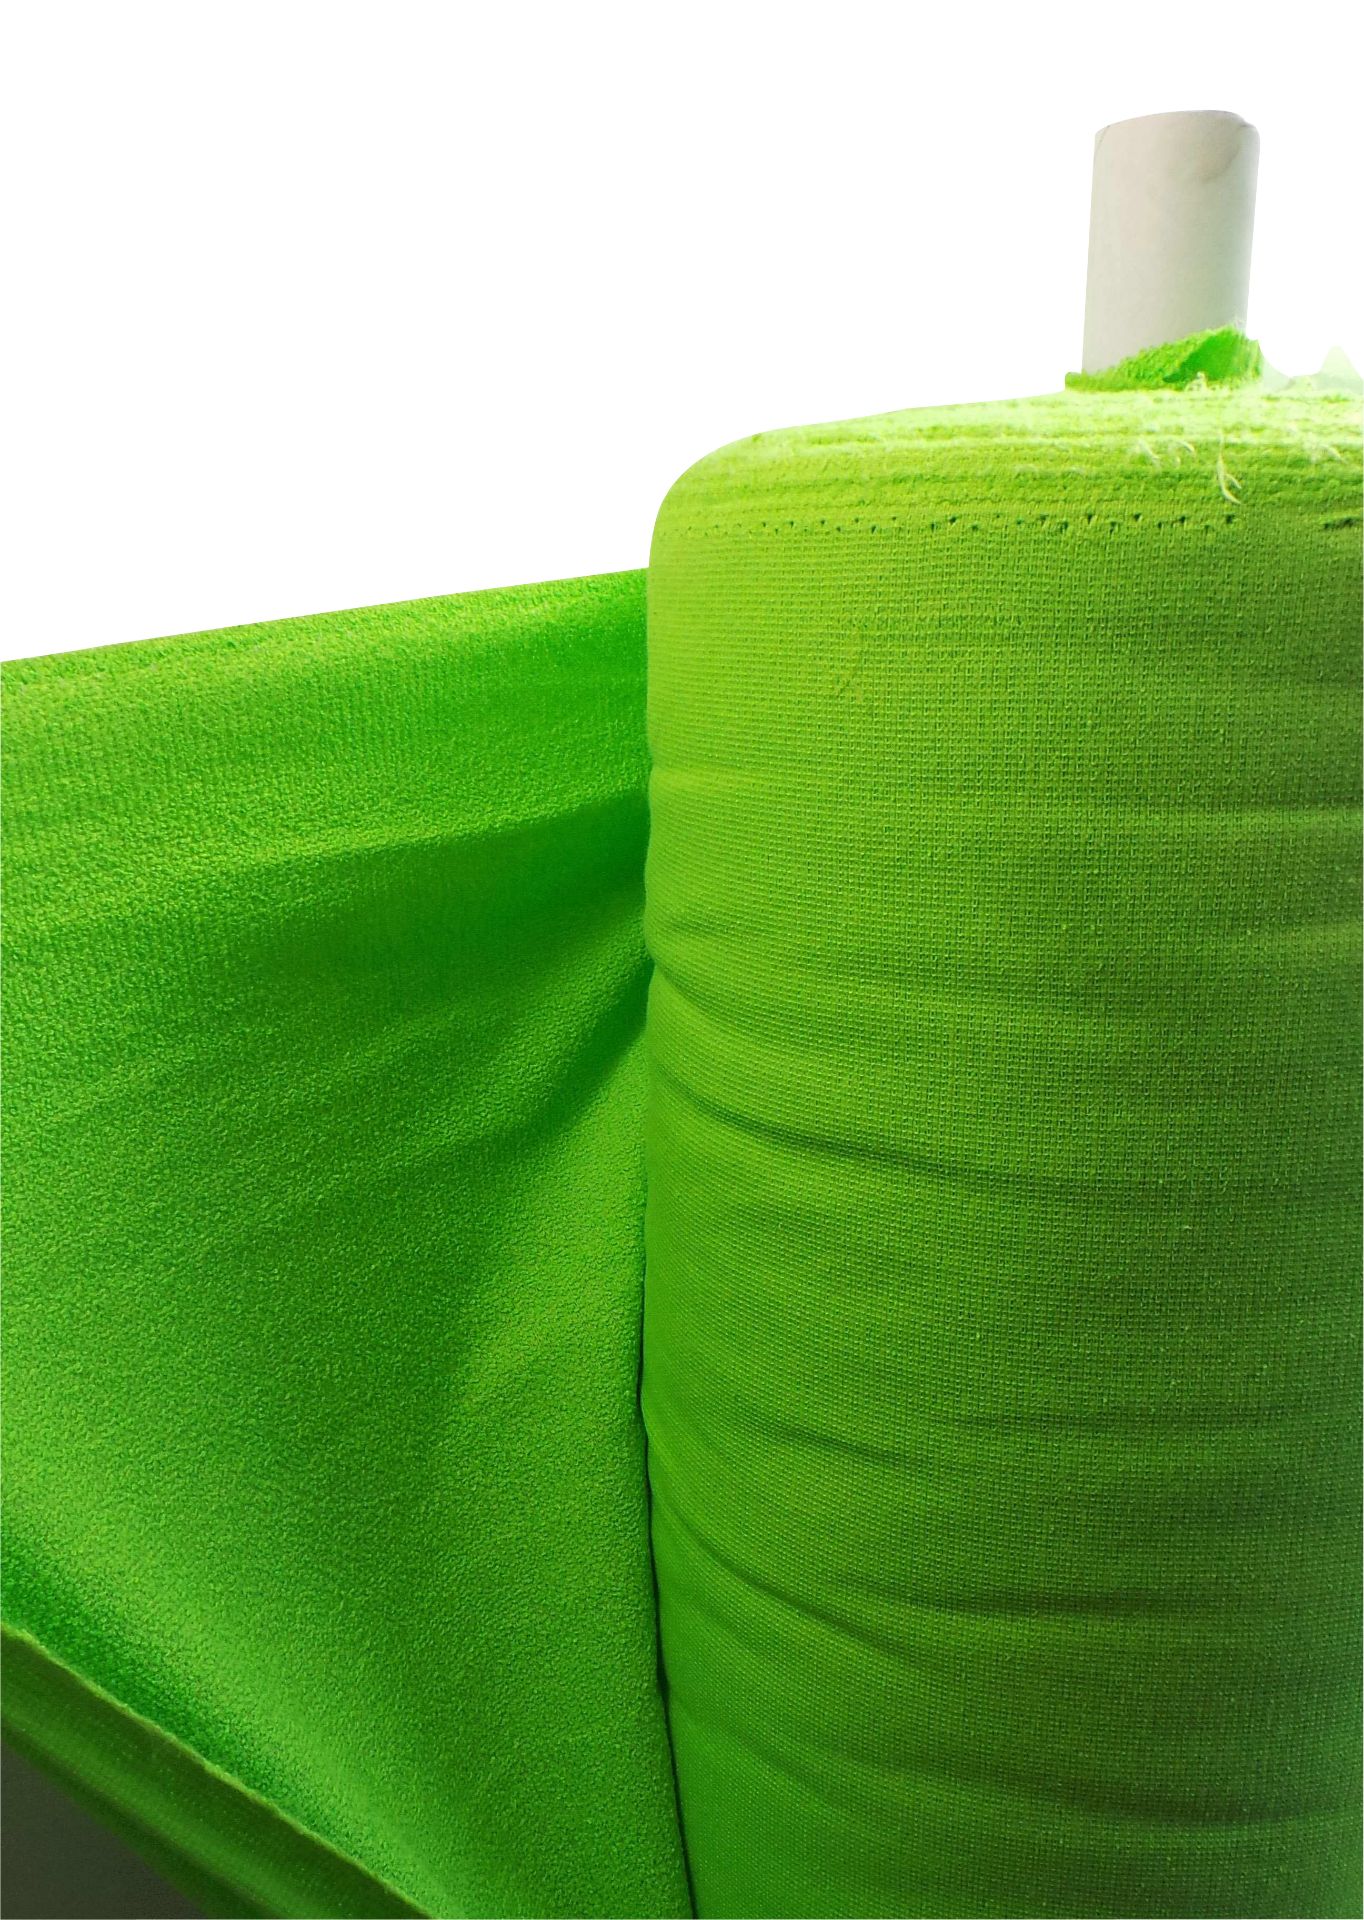 One Off Joblot of 100 Square Metres of Lime Green Terry Cotton/Nylon Fabrics - Image 4 of 5